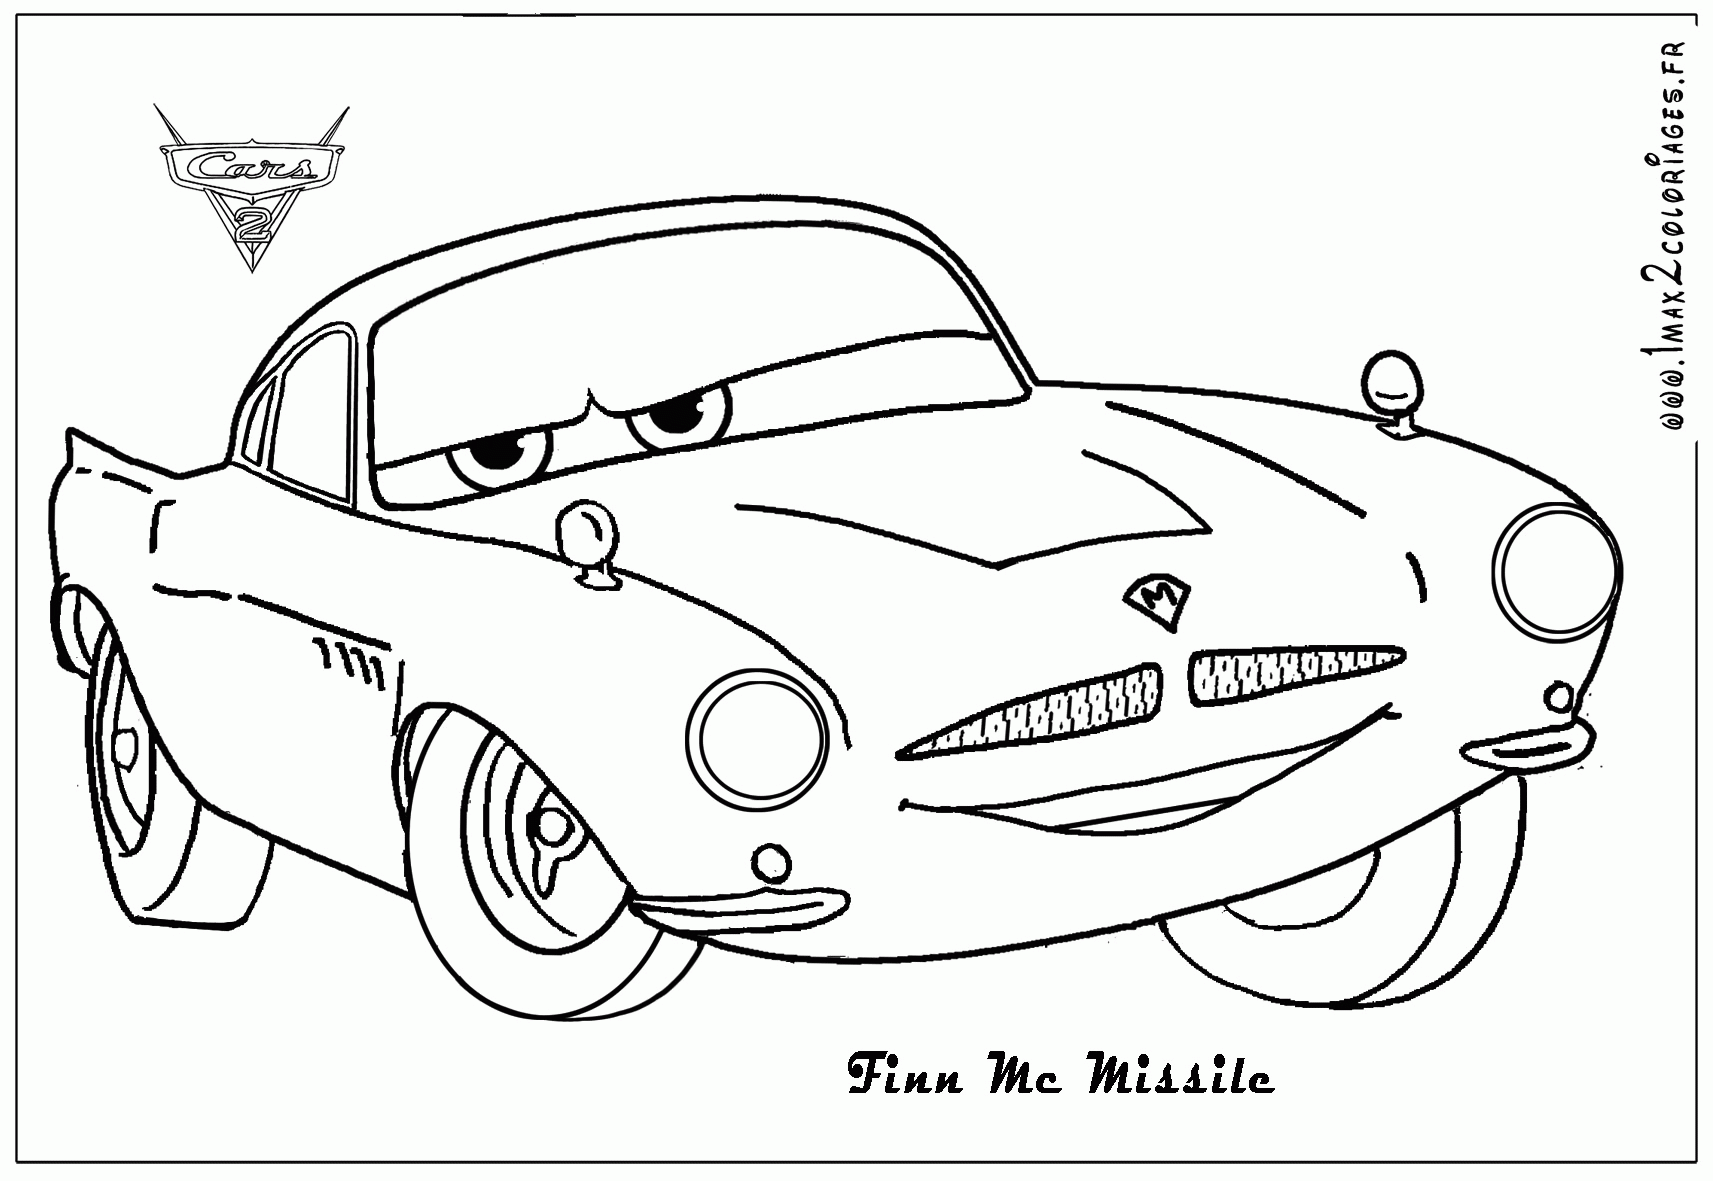 Cars 20 Coloring Pages 200 Pictures   Colorine.net   20 ...